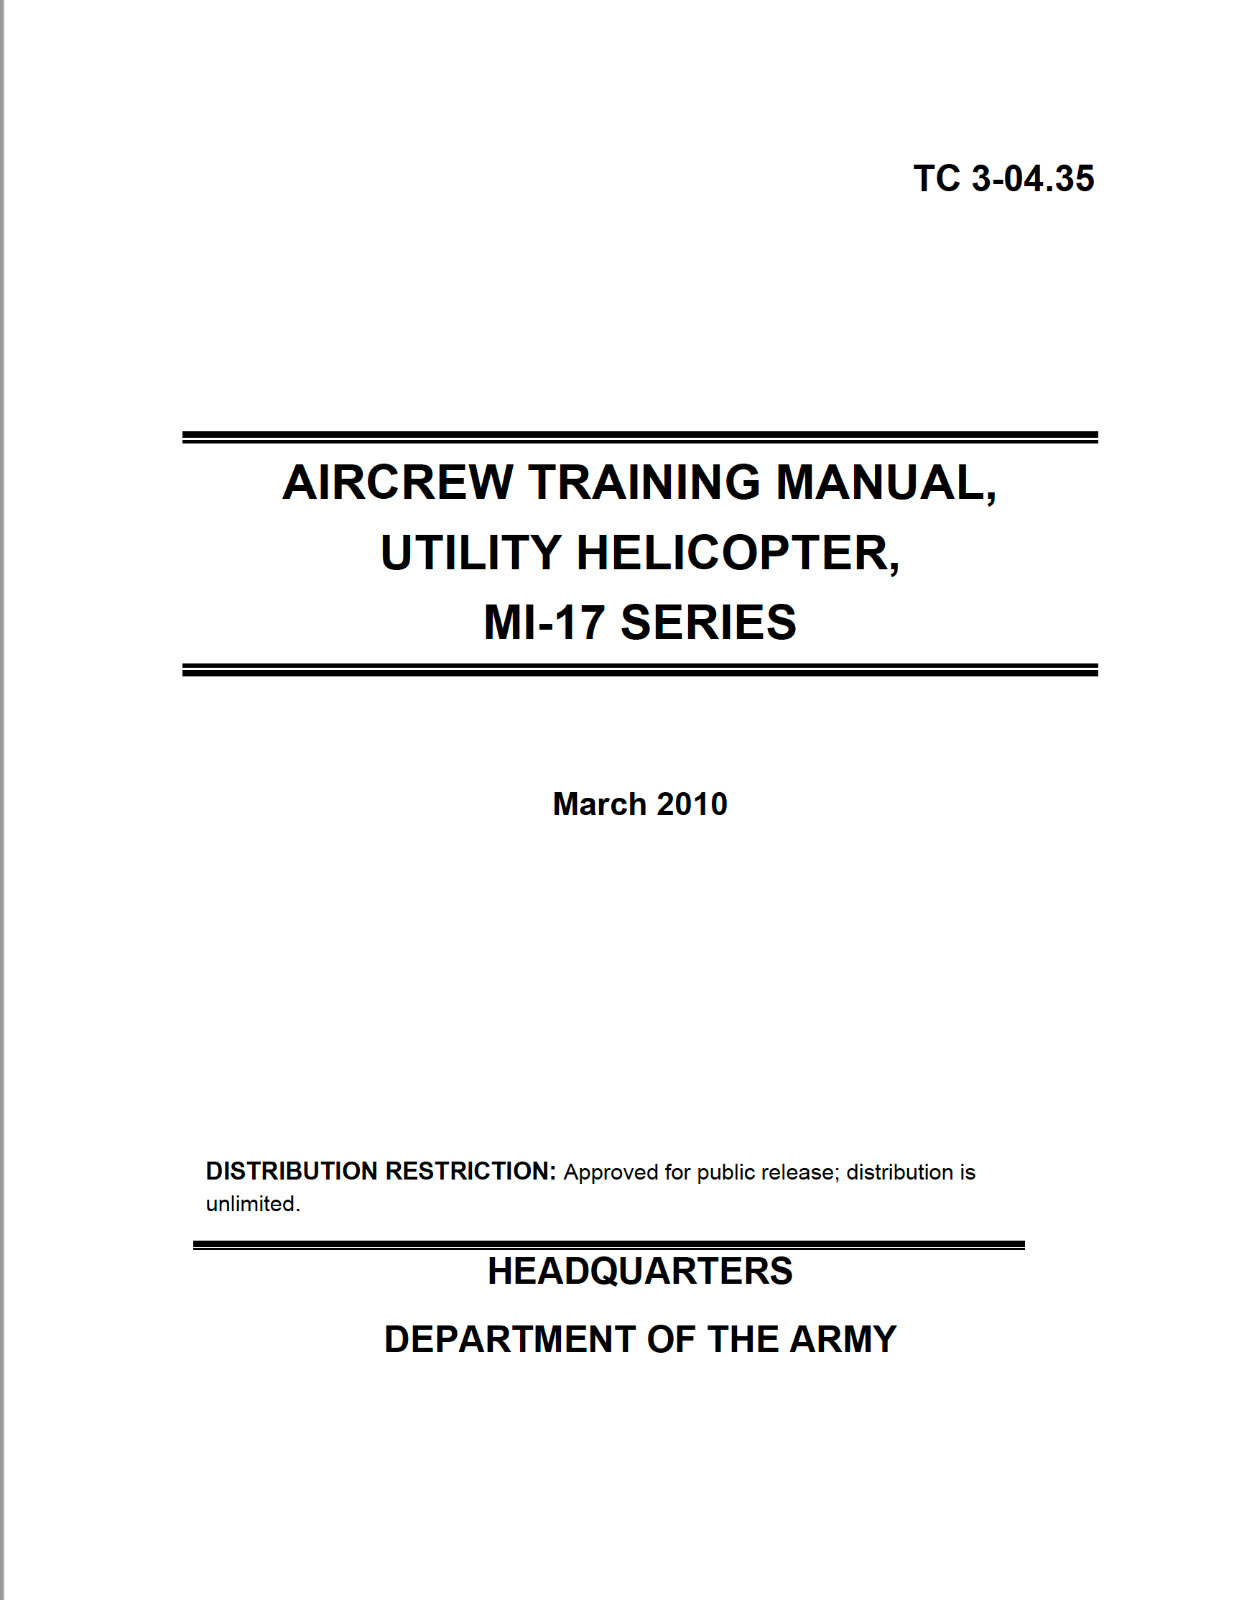 302 pg. Mil Mi-17 Mi-8 HIP AIRCREW TRAINING UTILITY HELICOPTER Manual on Data CD